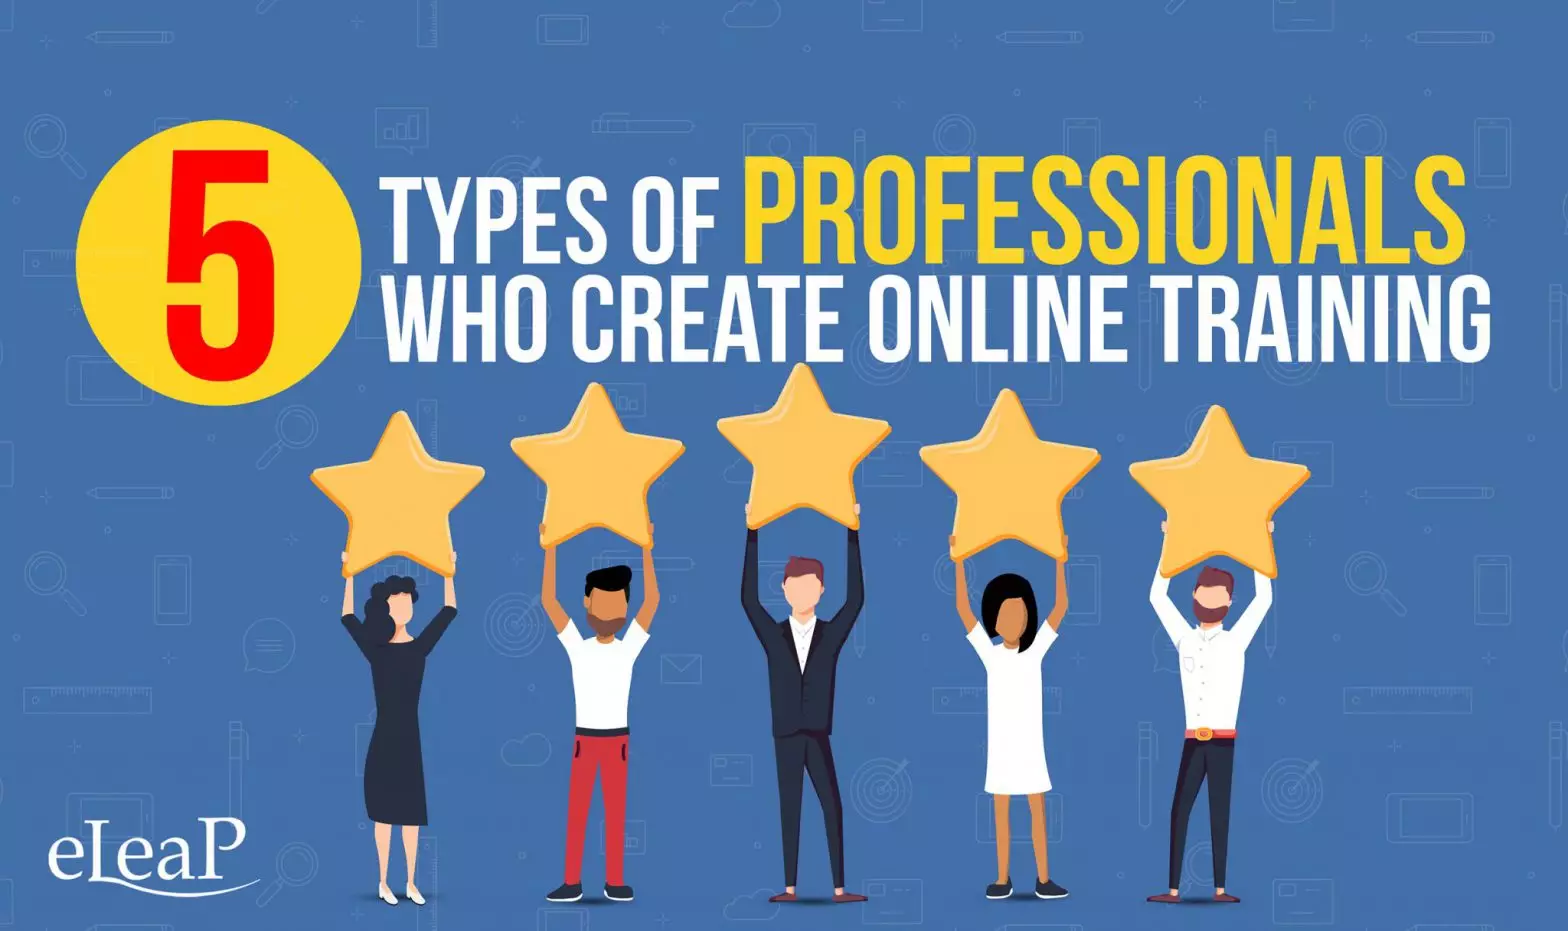 5 Types of Professionals Who Create Online Training